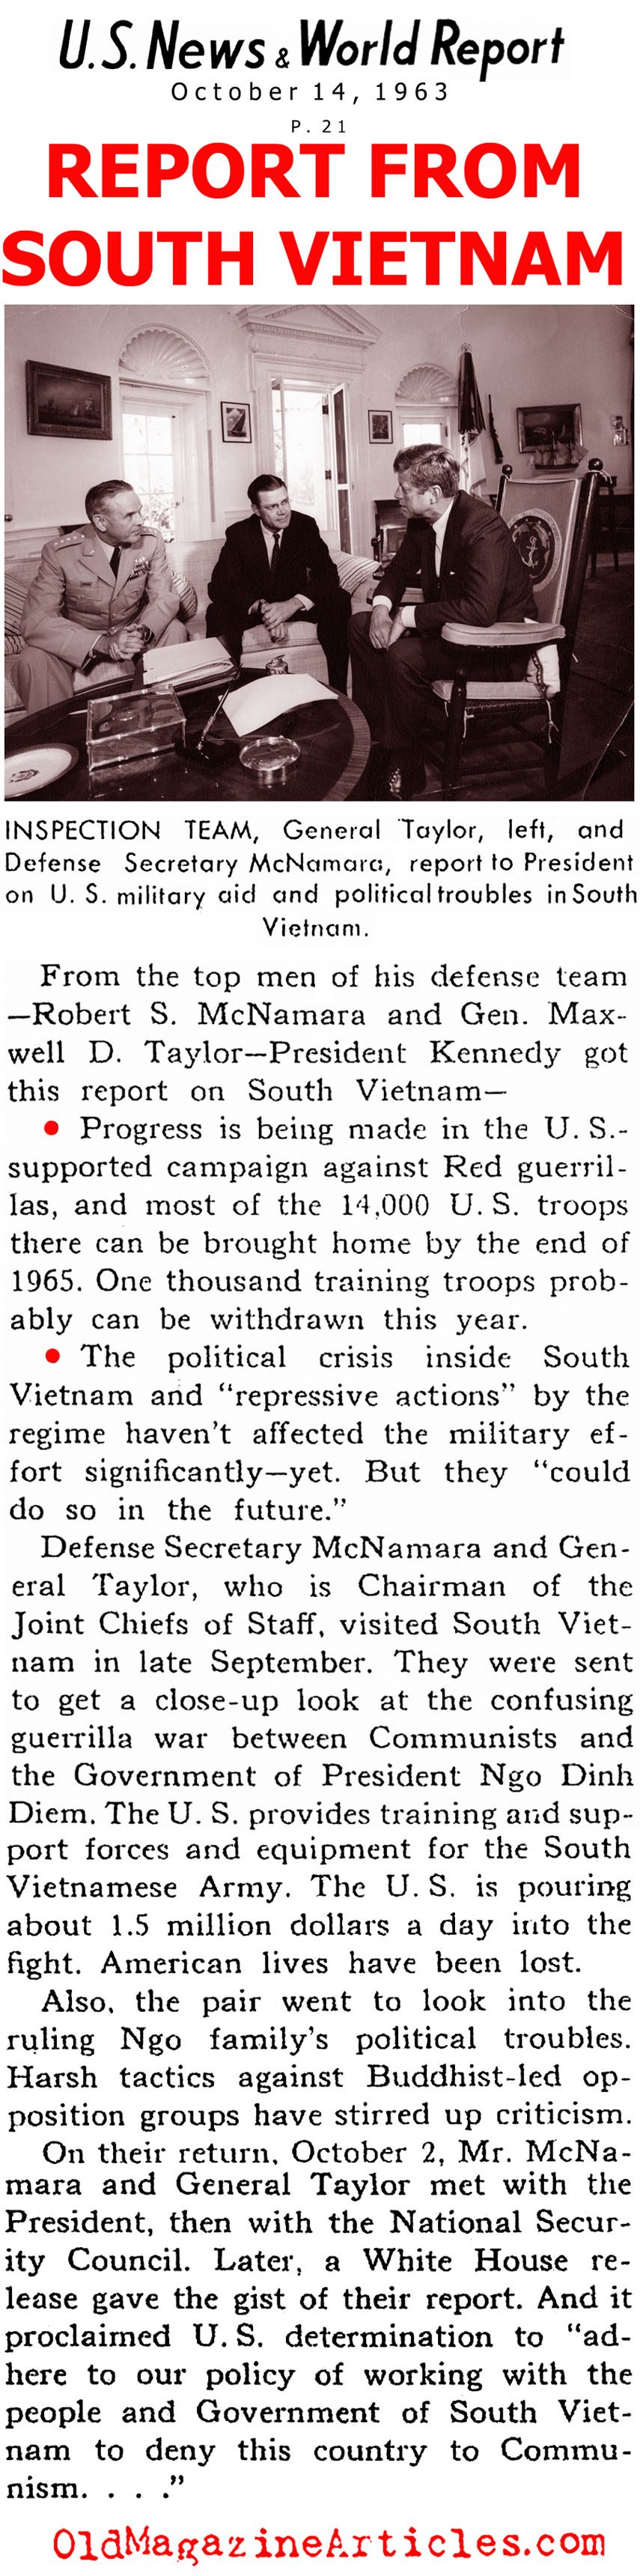 1963: A Pivotal Year  (United States News, 1963)